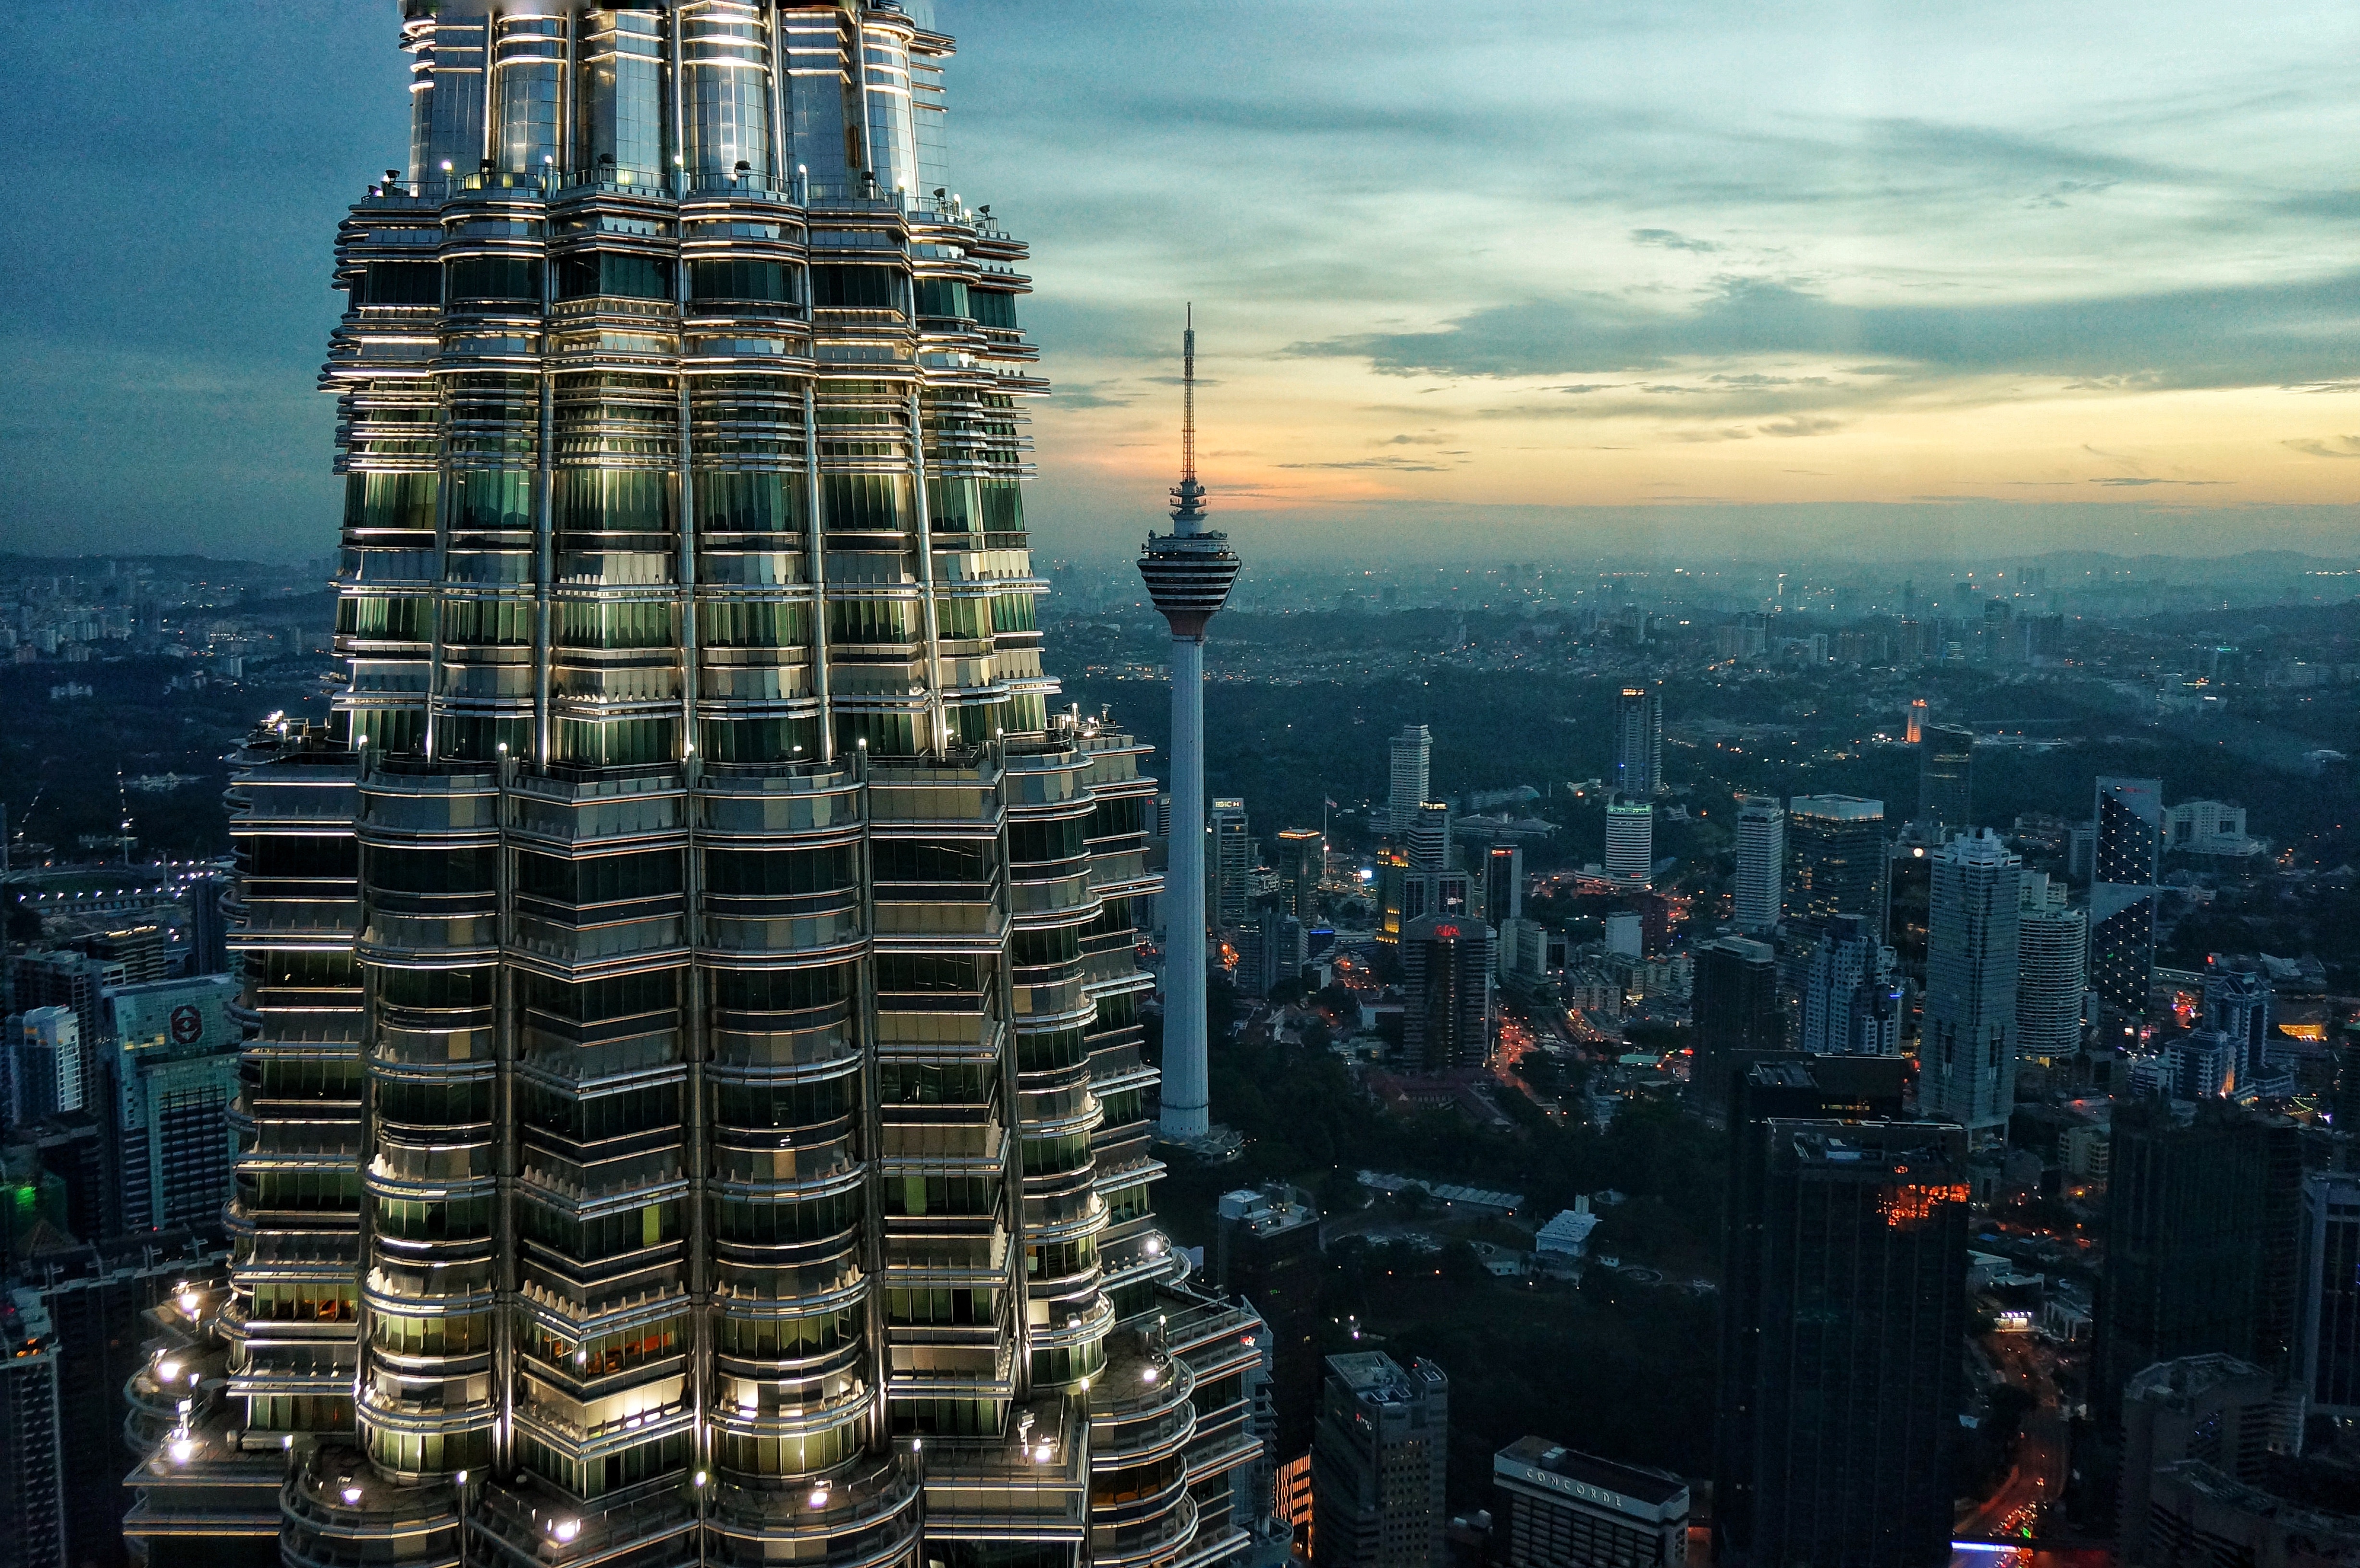 Deal Alert: Fly To Kuala Lumpur, Malaysia For $475 Round-Trip